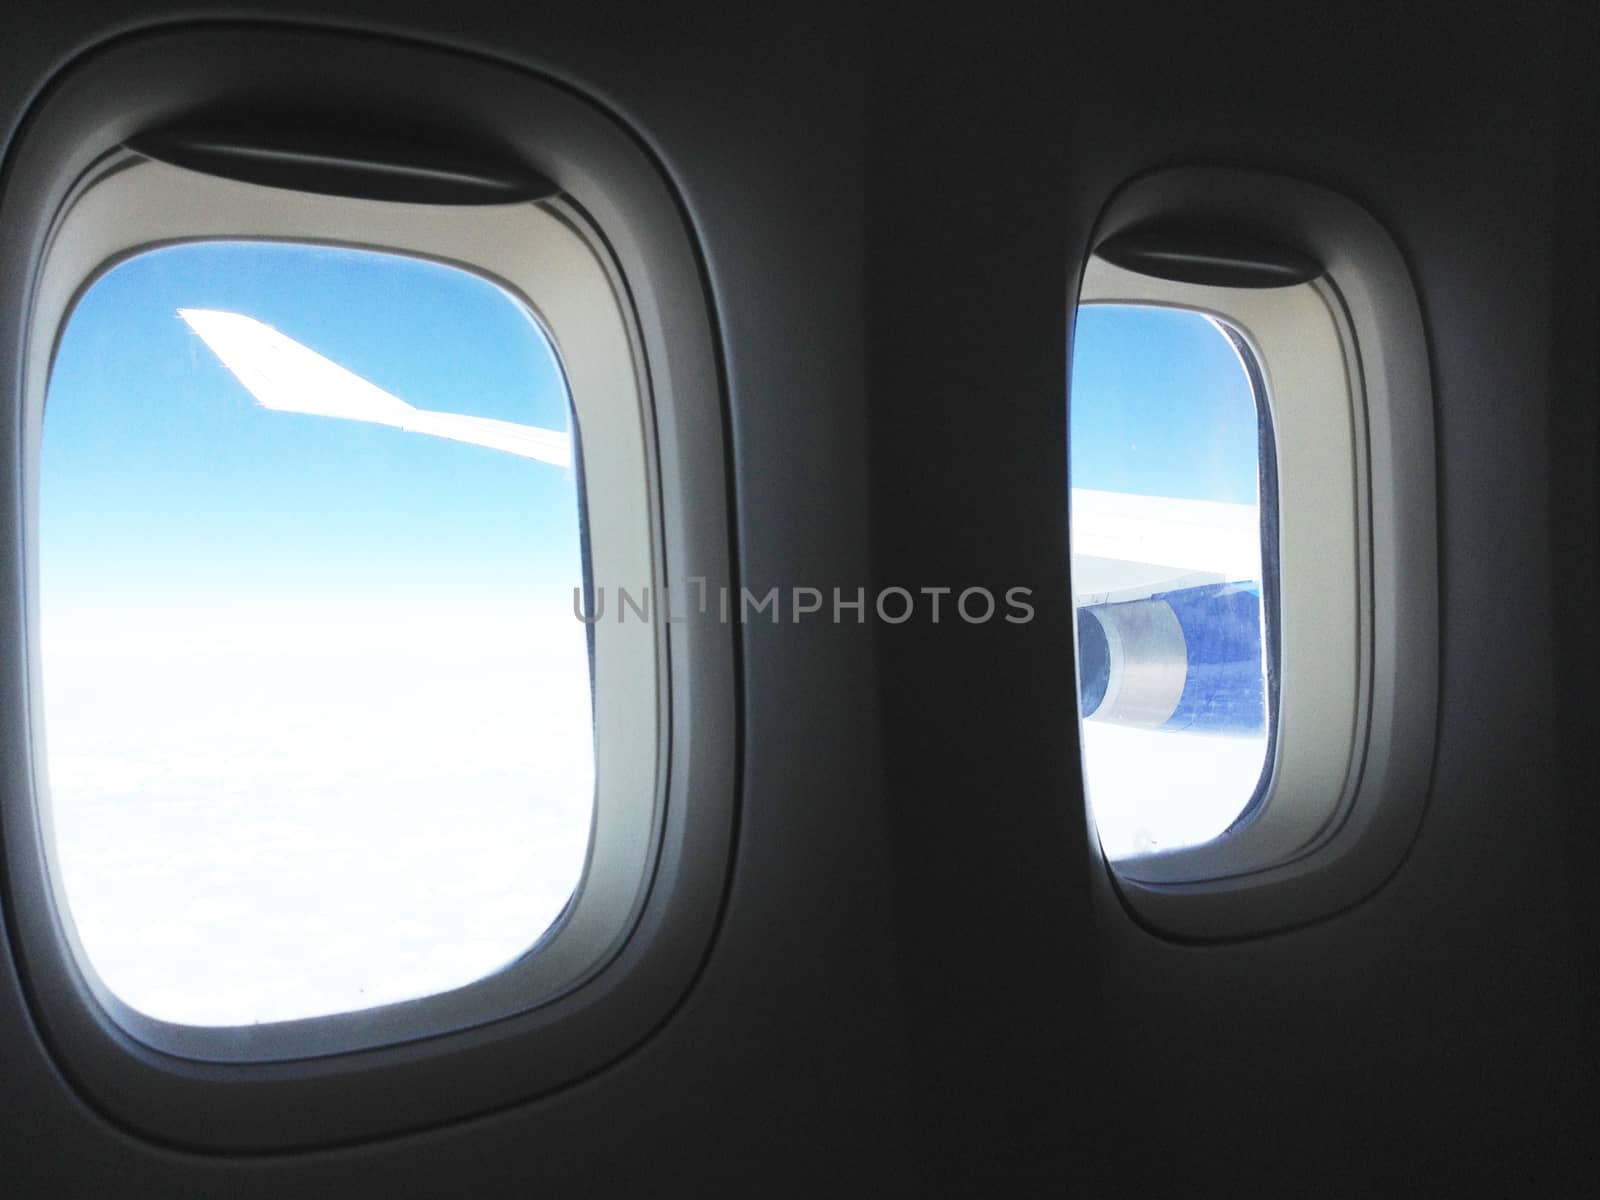 The view from the airplane on the wing, flying over the clouds. The concept of traveling by plane.